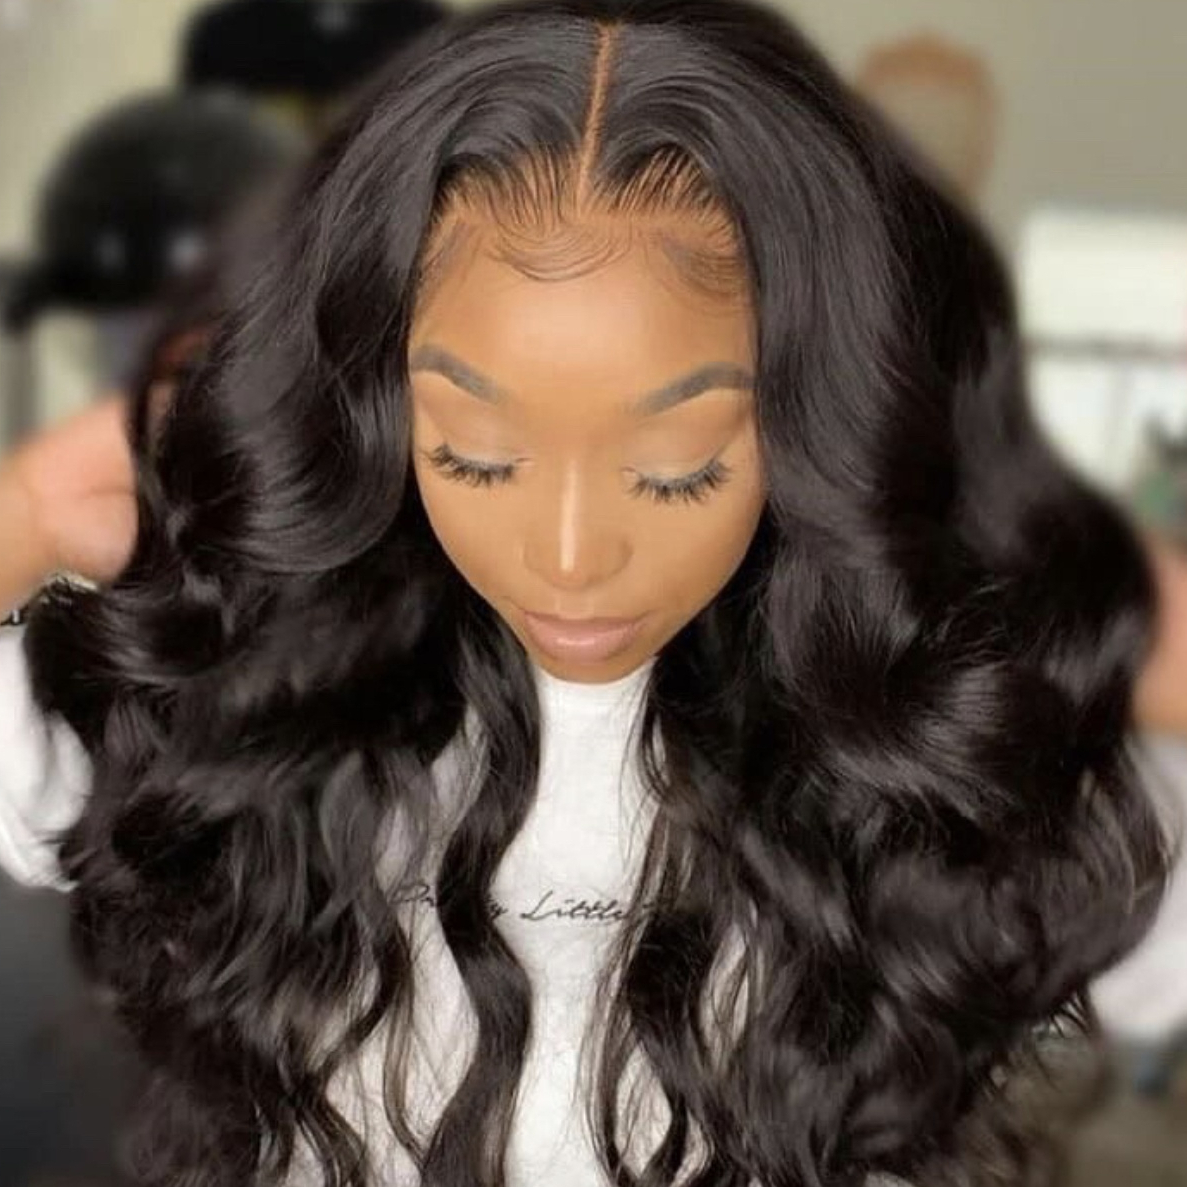 Higher Density 100% Virgin Remy Brazilian Hair Lace Wigs Natural Hairline for Black Women Body Wave Frontal Lace 